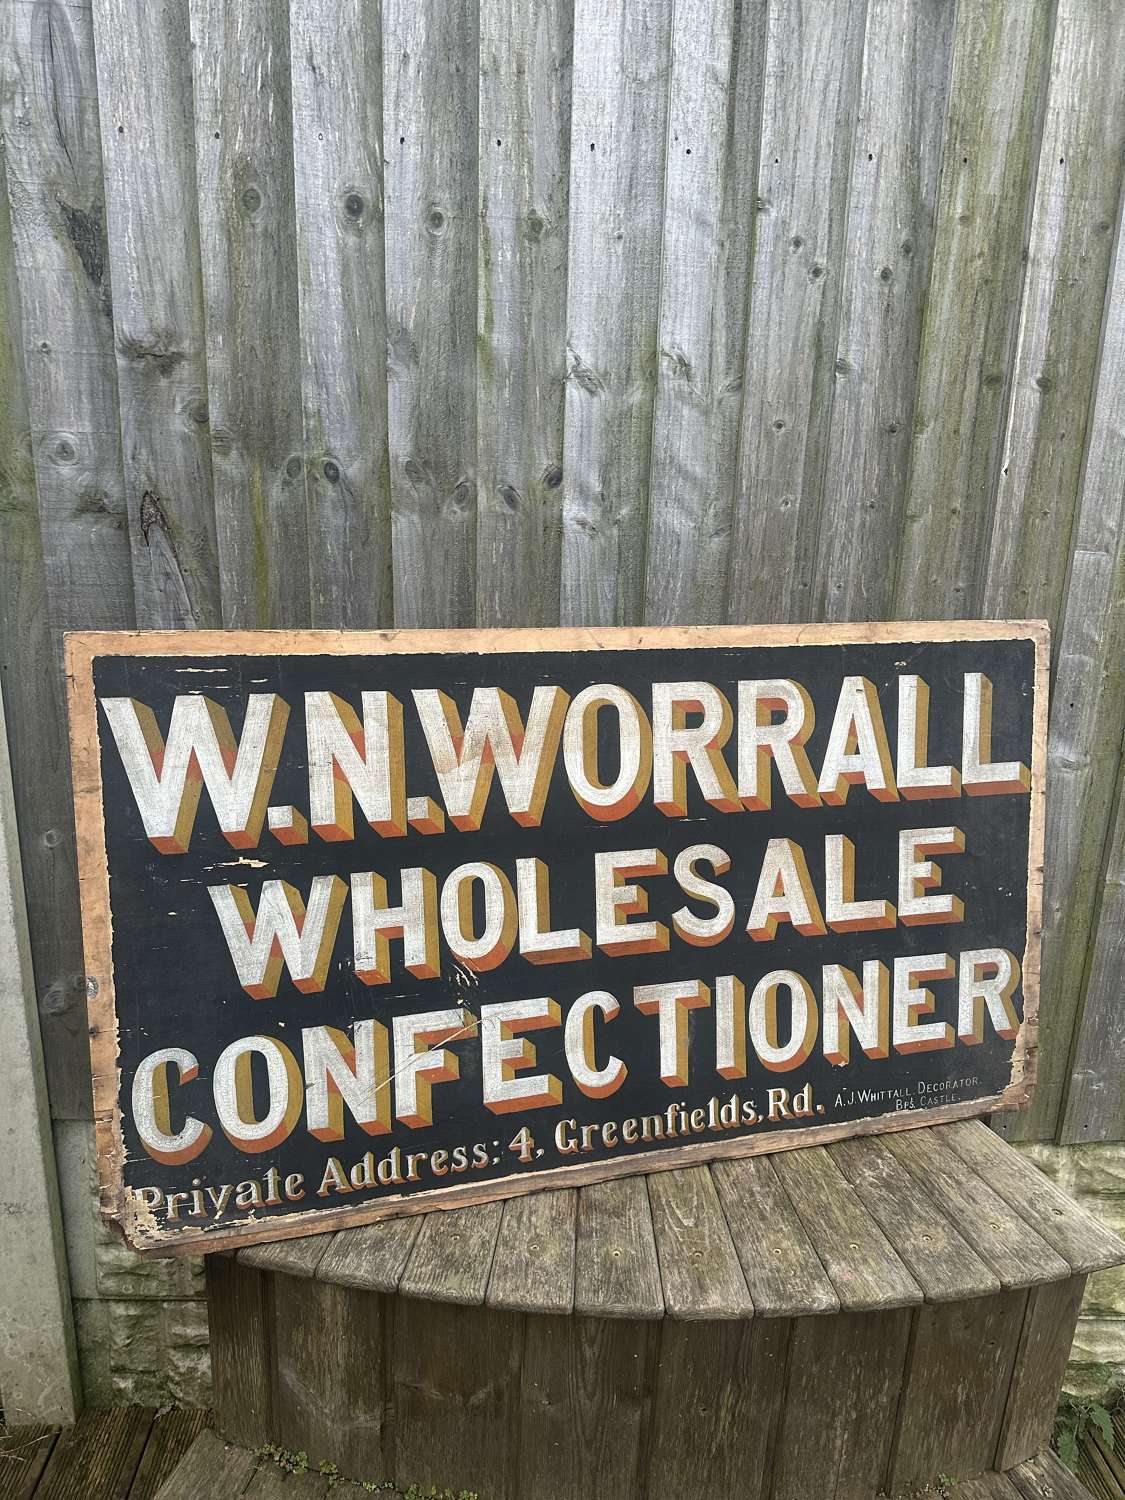 Lovely wooden confectionery advertising sign